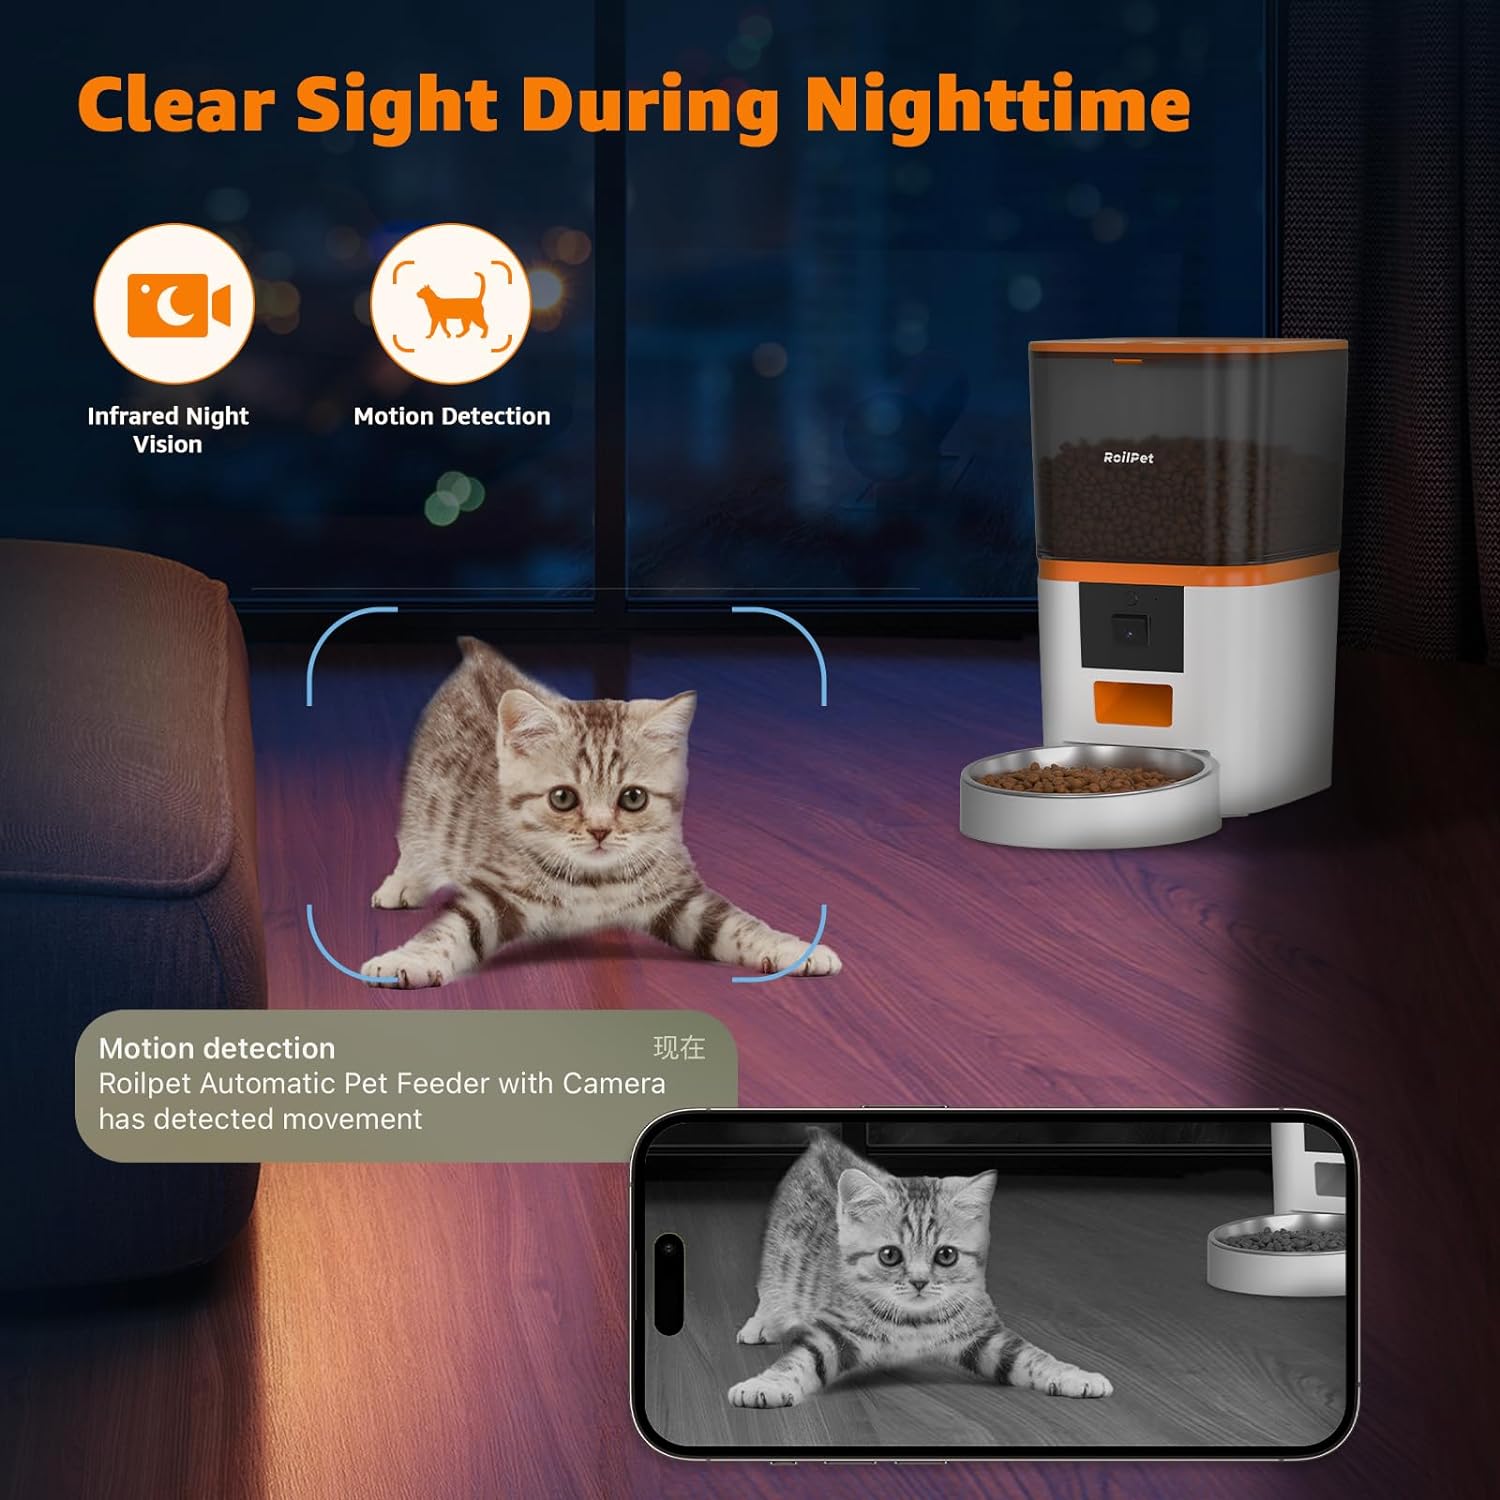 Roilpet Automatic Dog Feeder with Camera, 5G WiFi 6L Smart Cat Food Dispenser, 1080P HD Video with Night Vision, Pet Feeder with 2-Way Audio for Cats  Dogs, Low Food  Blockage  Motion Alerts